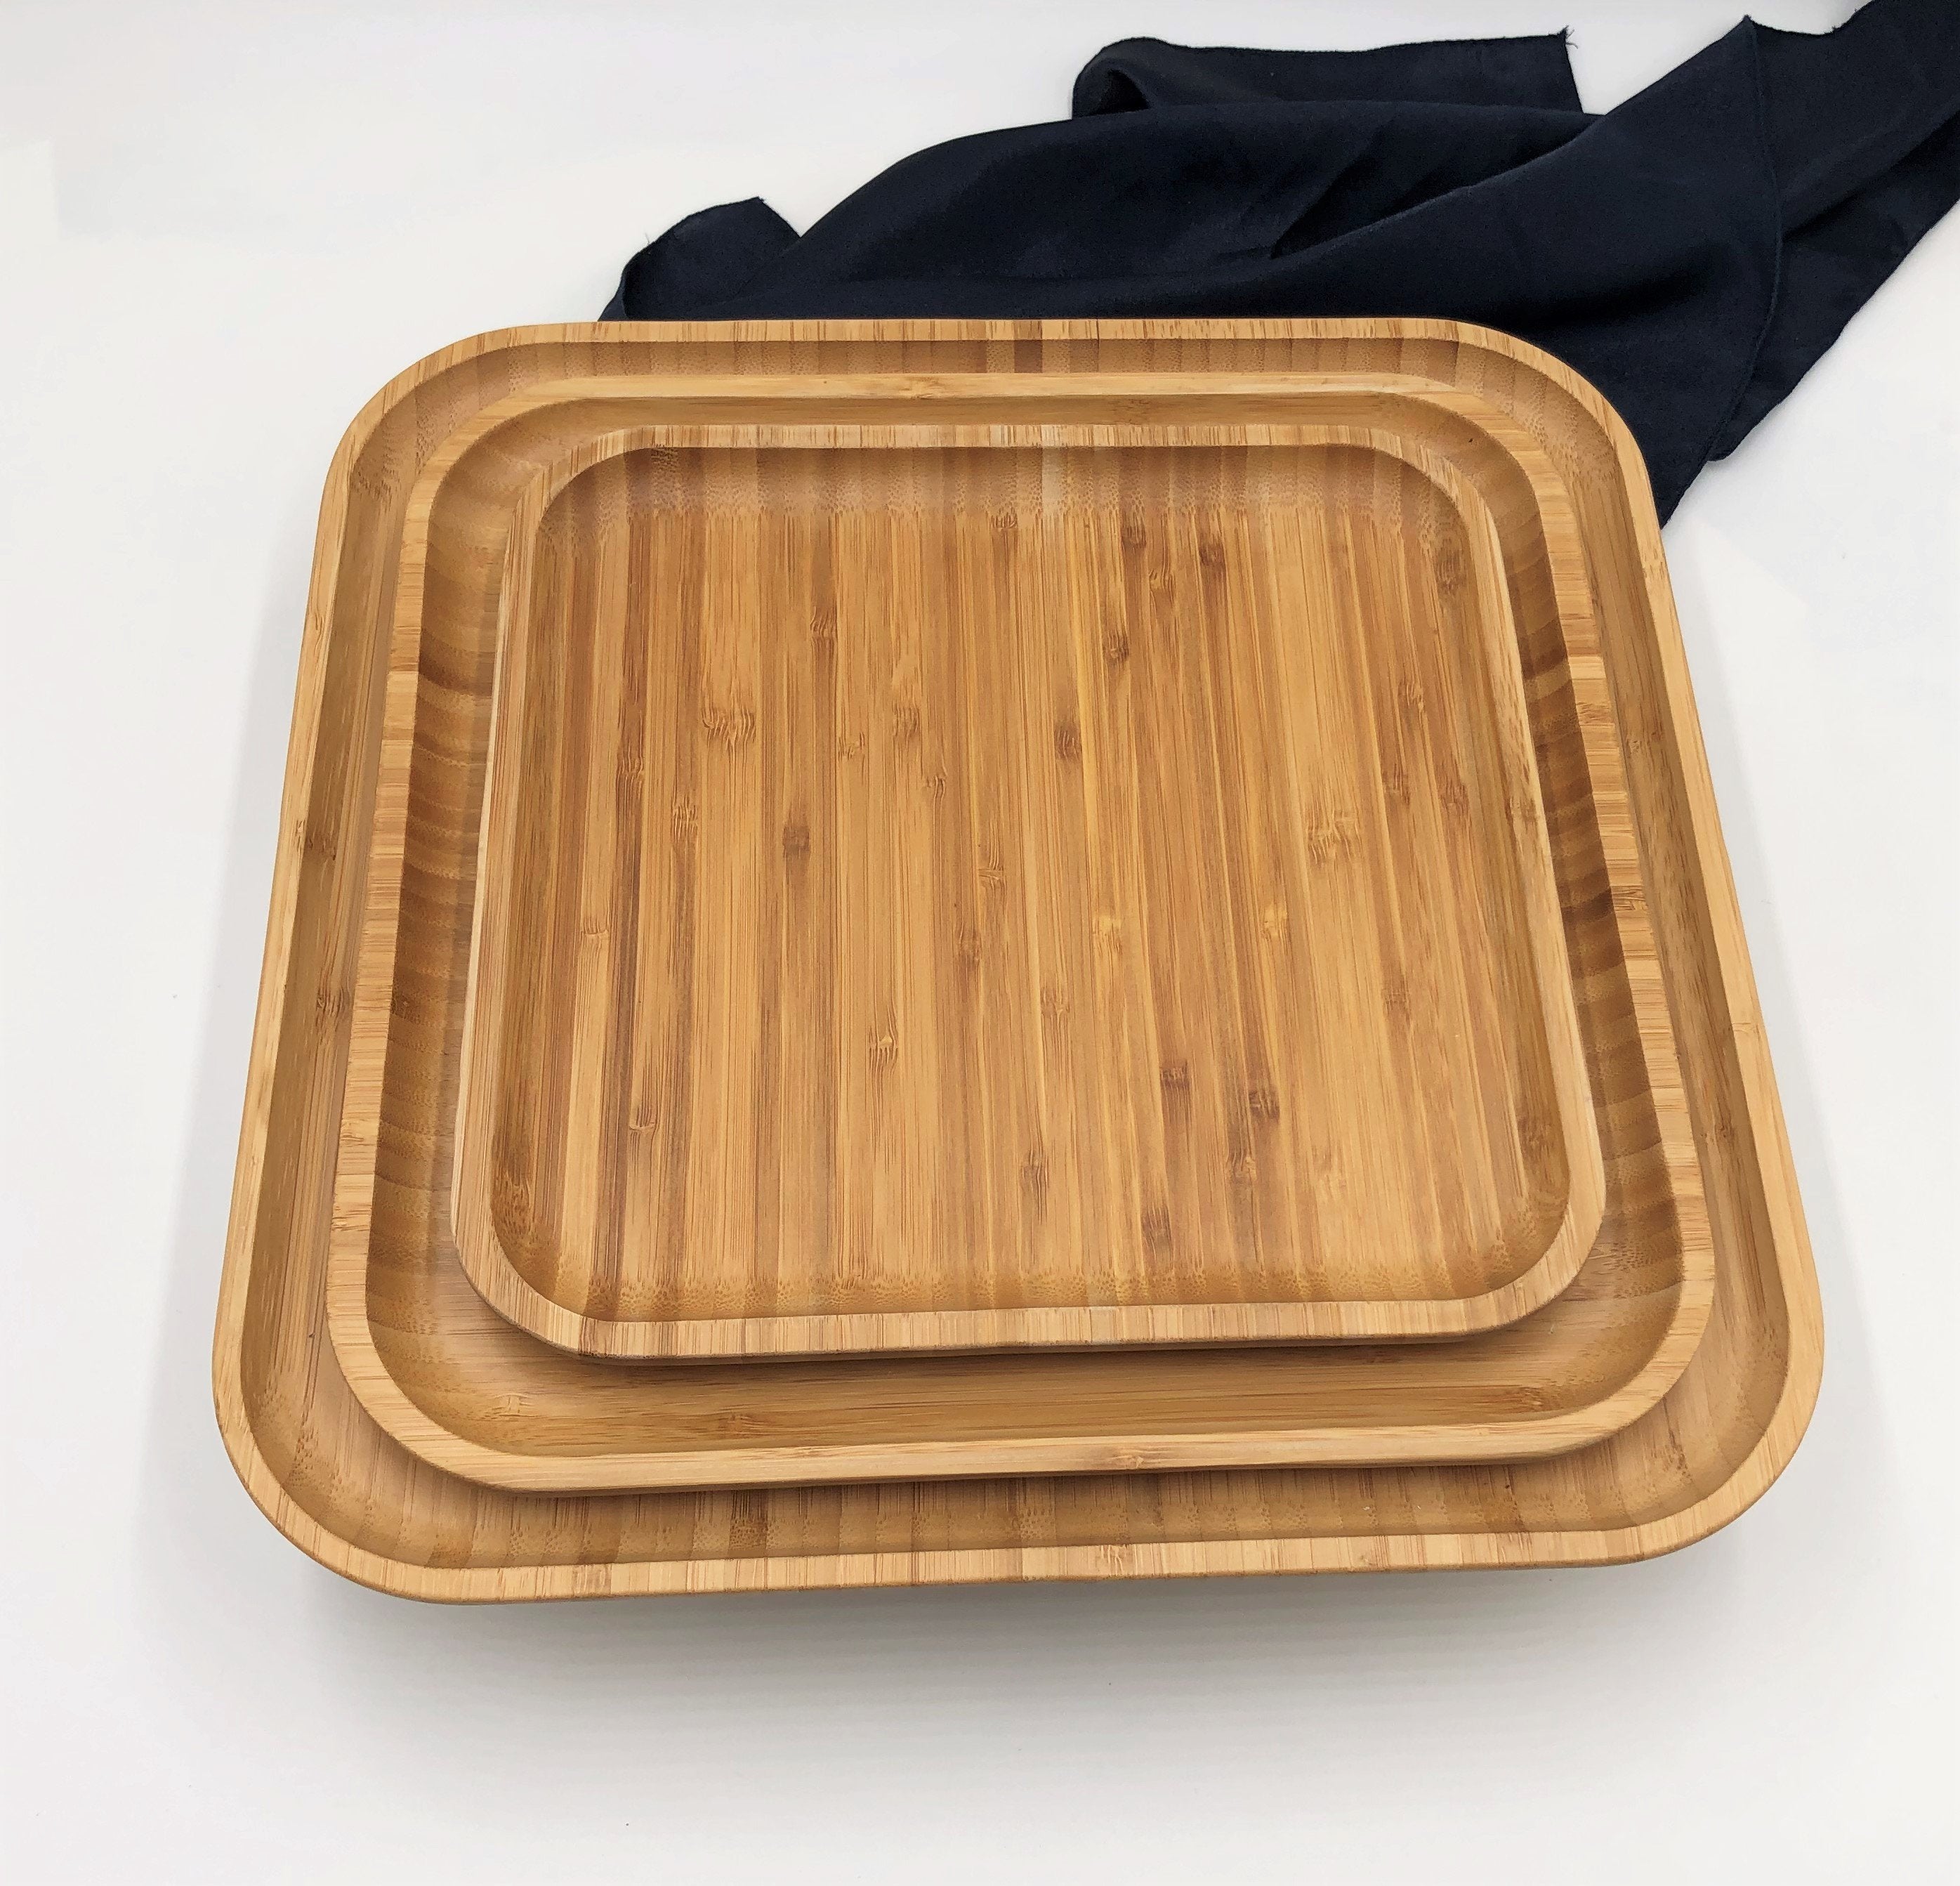 Square Bamboo and Porcelain Dinnerware, Set of 3